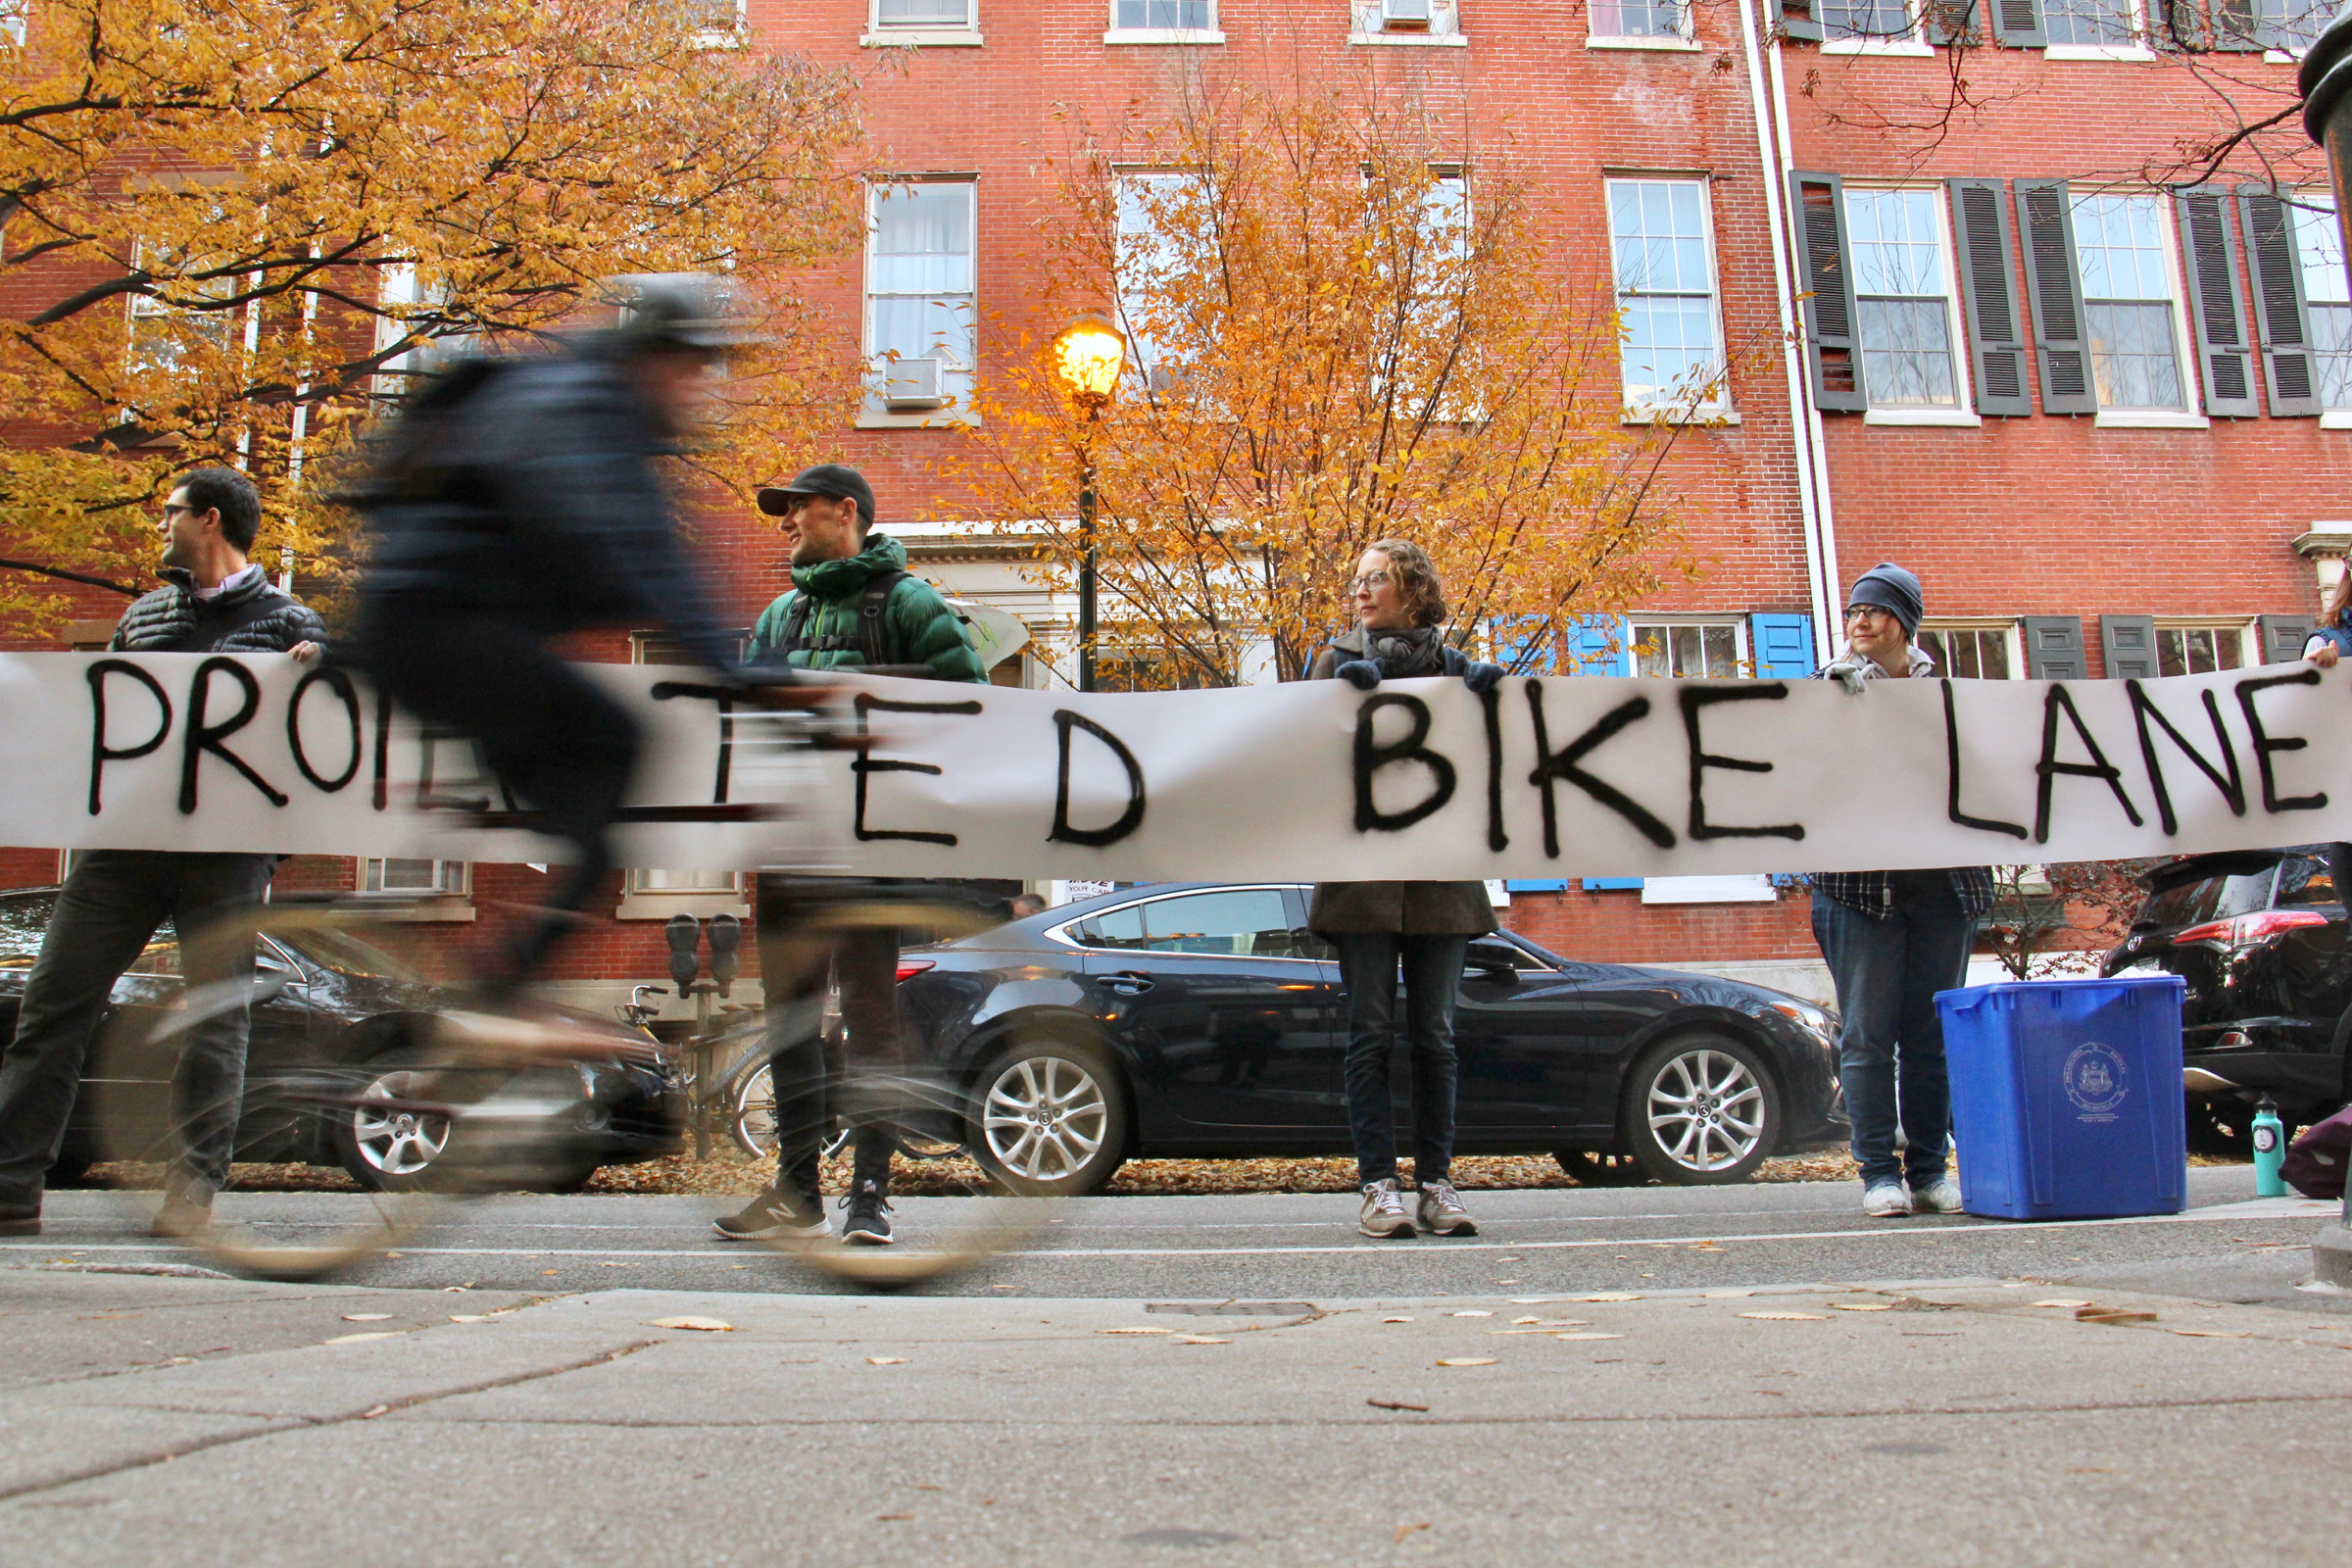 Bicyclists forming a human-protected bike lane hold up a banner calling for protected bike lanes near site of a fatal crash the day prior